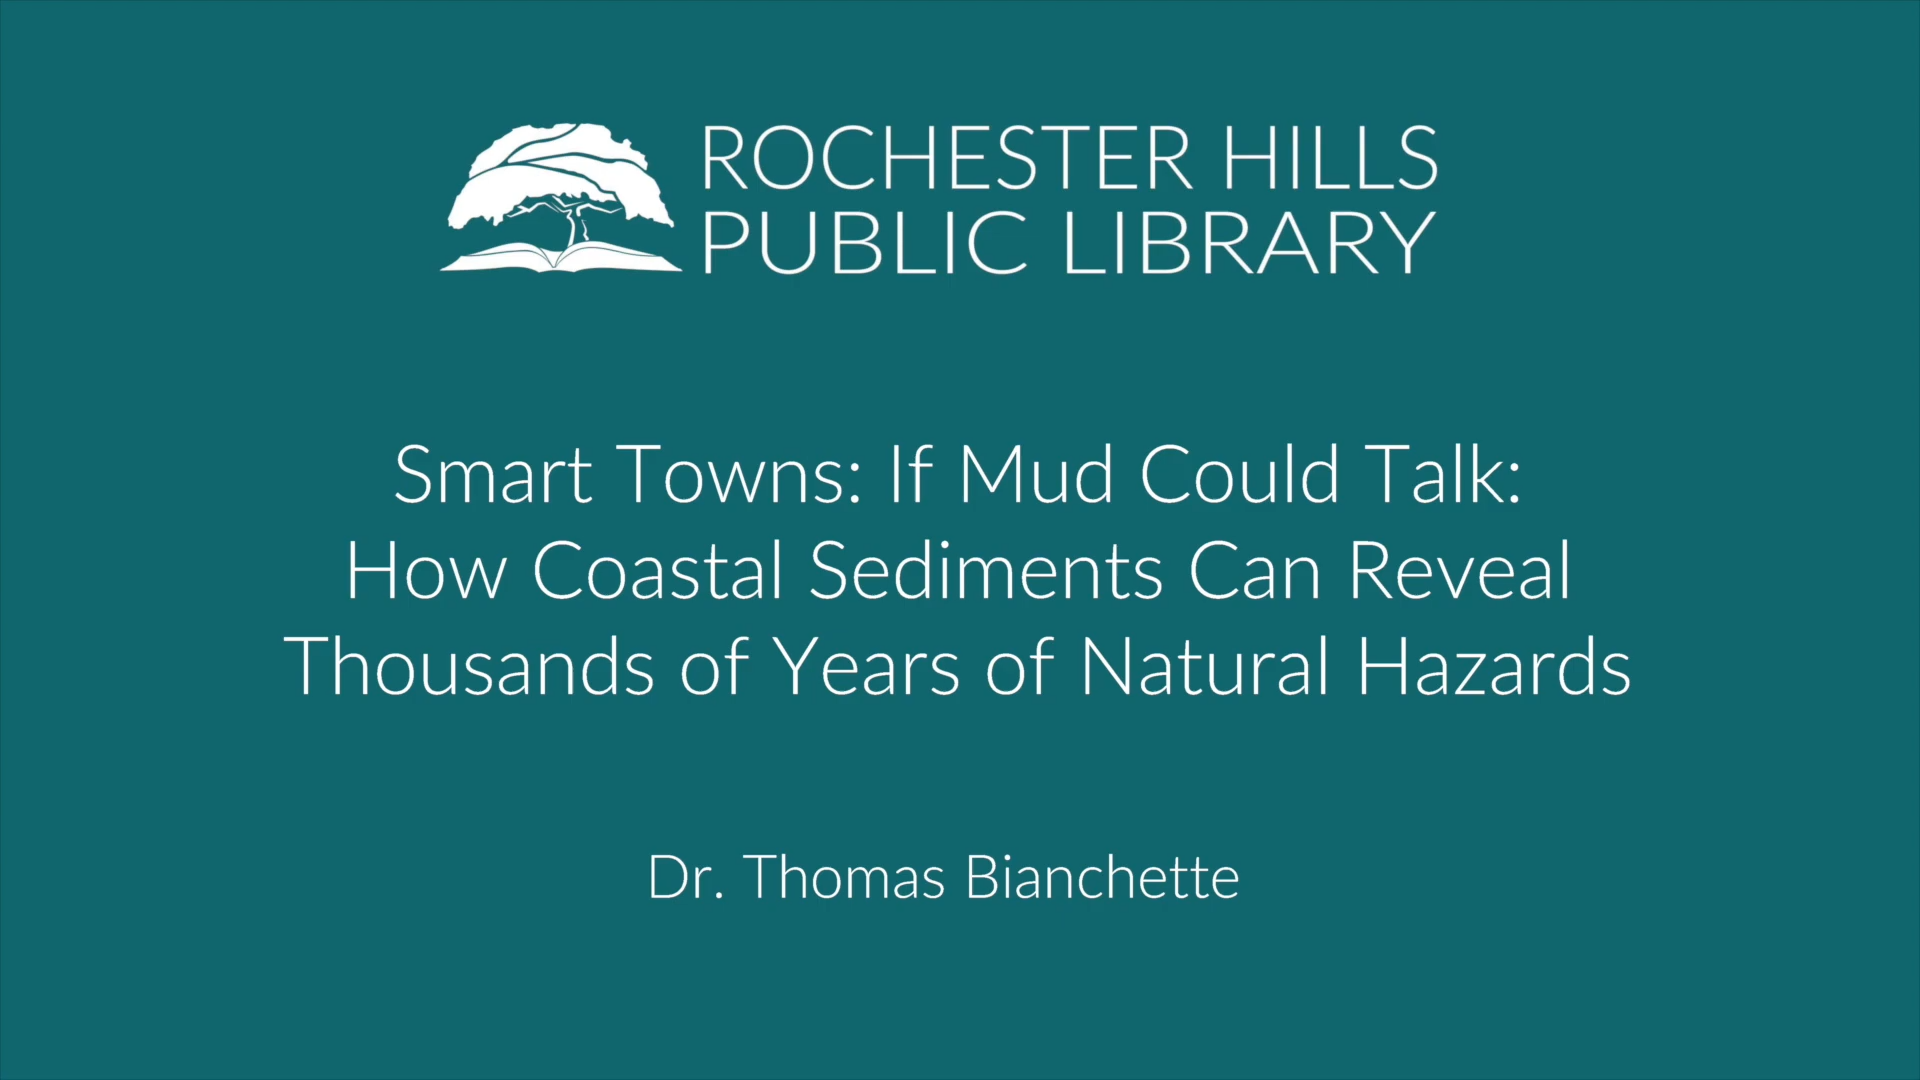 Smart Towns: If Mud Could Talk: How Coastal Sediments Reveal Thousands of Years of Natural Hazards